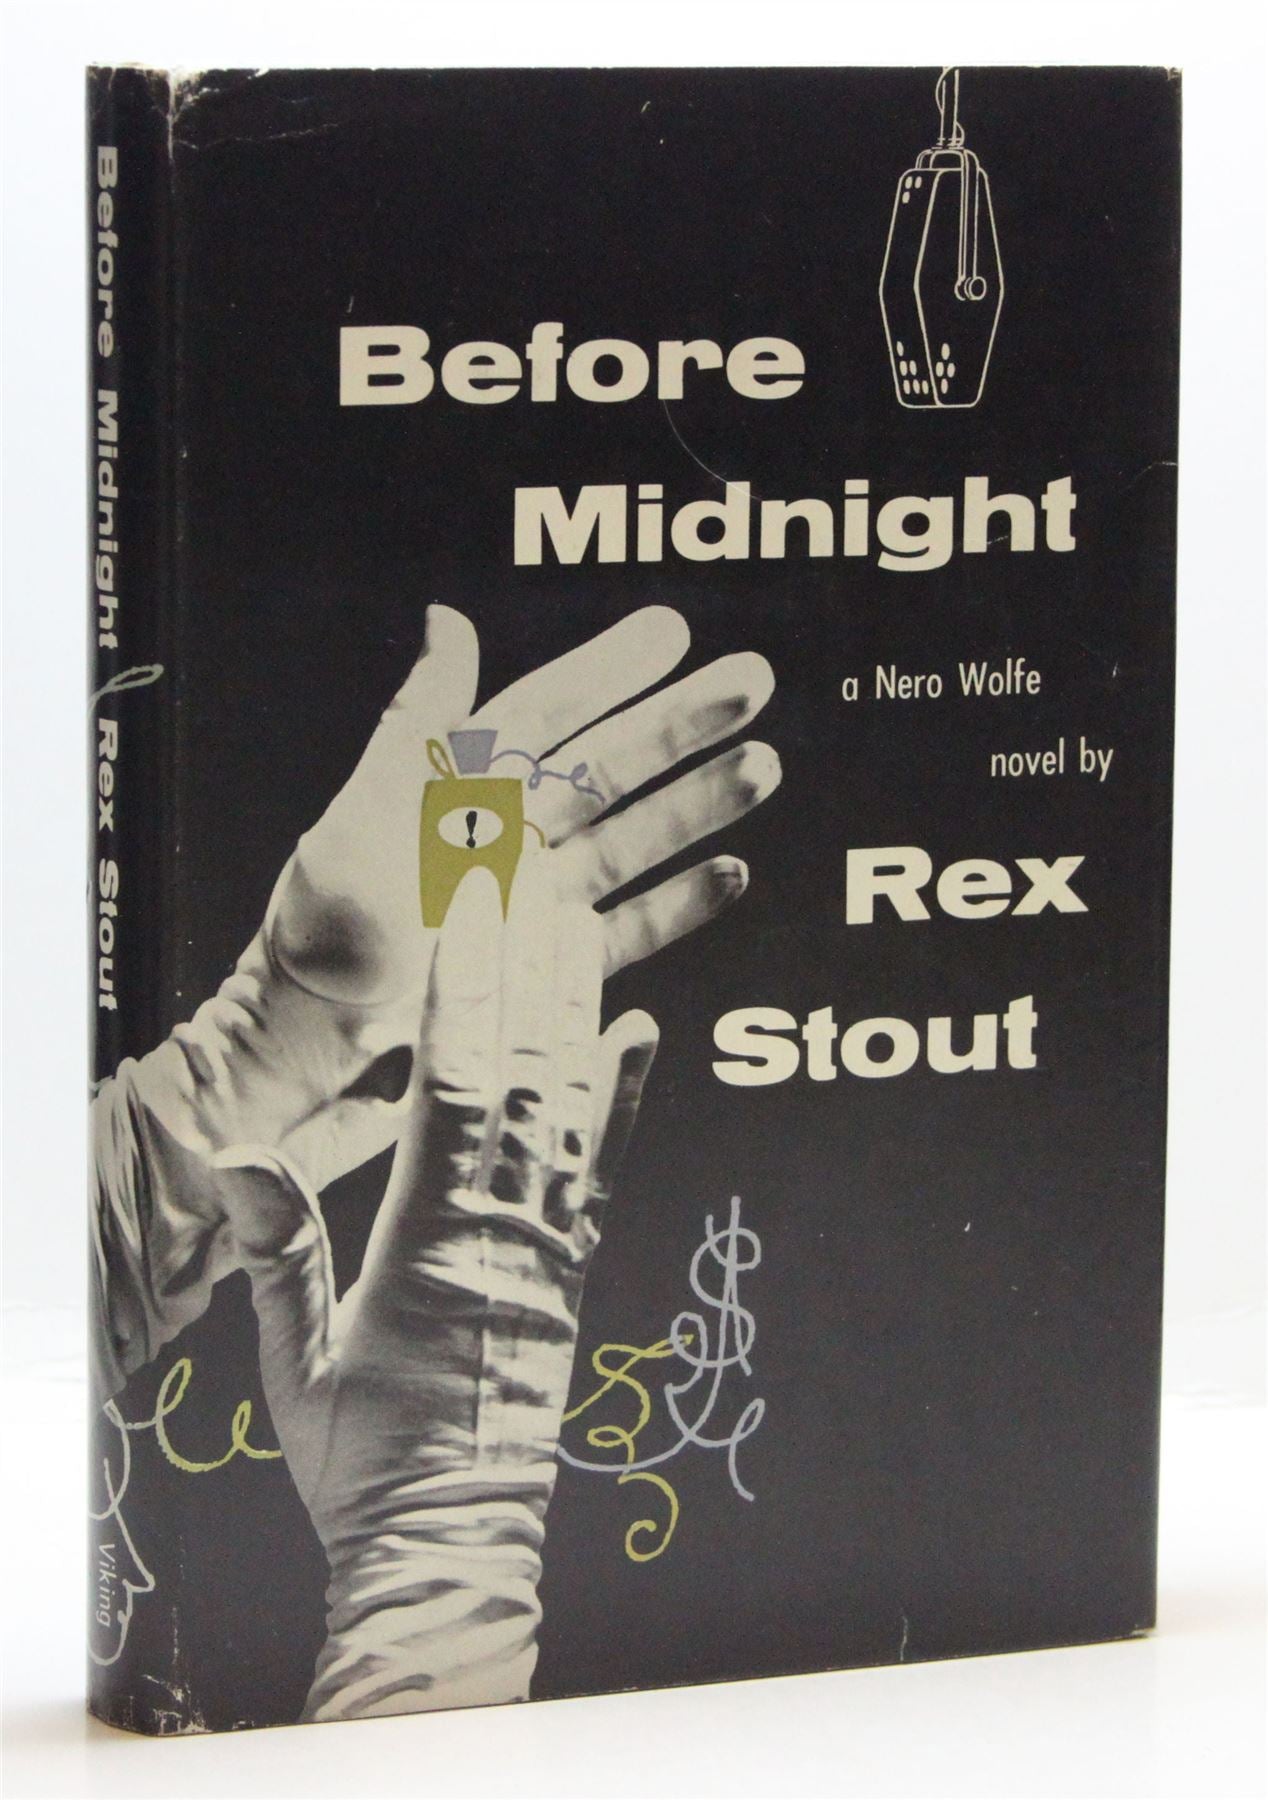 Before Midnight: A Nero Wolfe novel